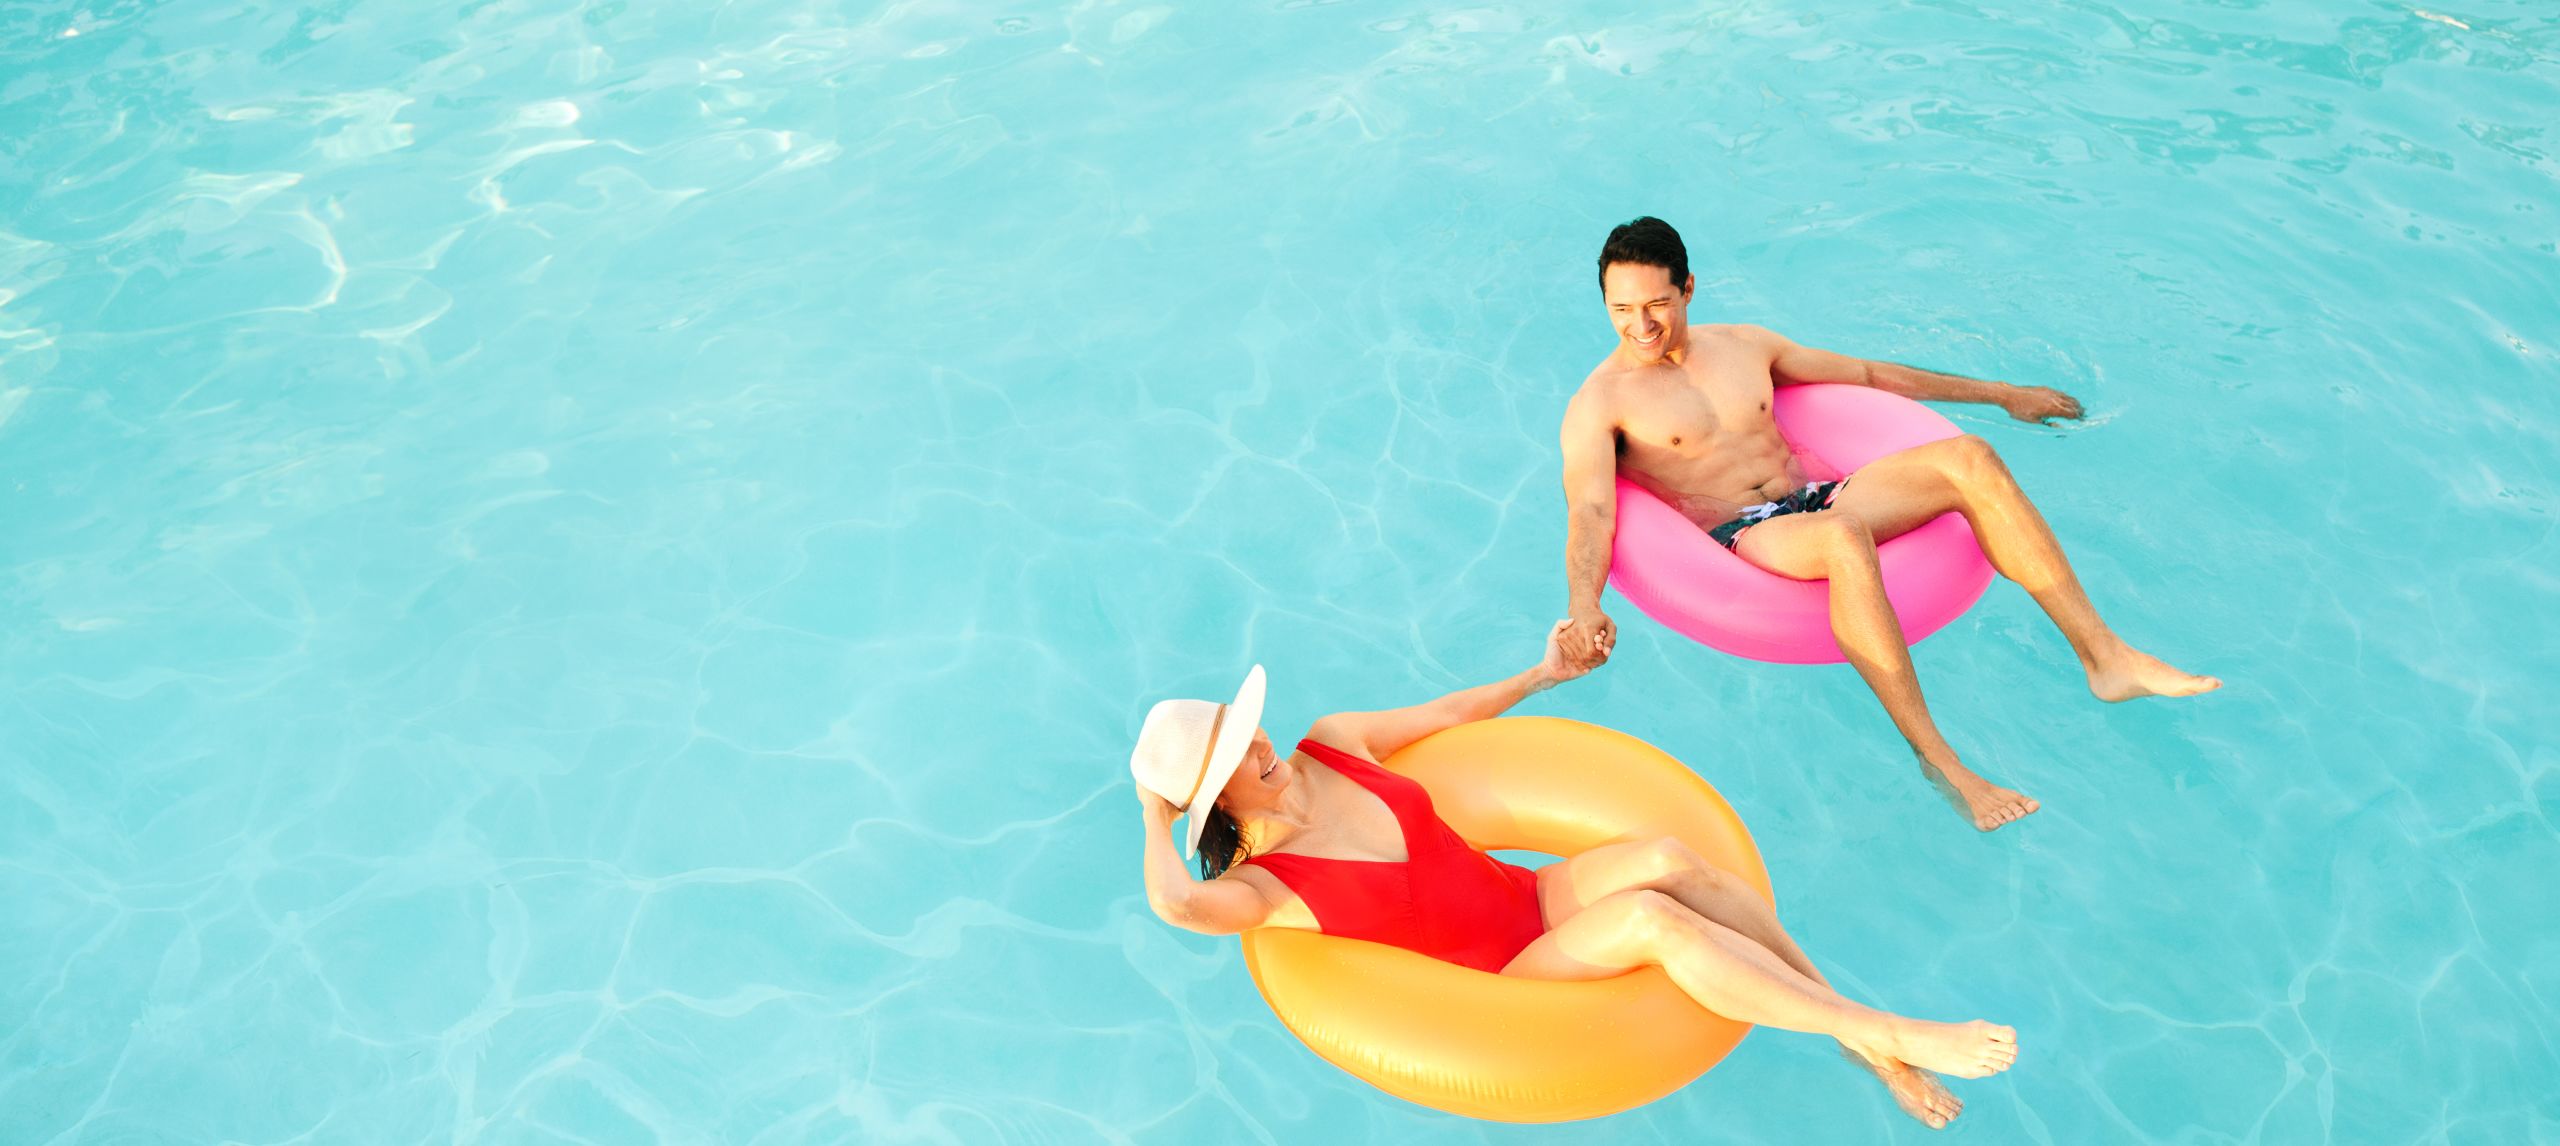 Man and woman relaxing in pool, on rubber rings